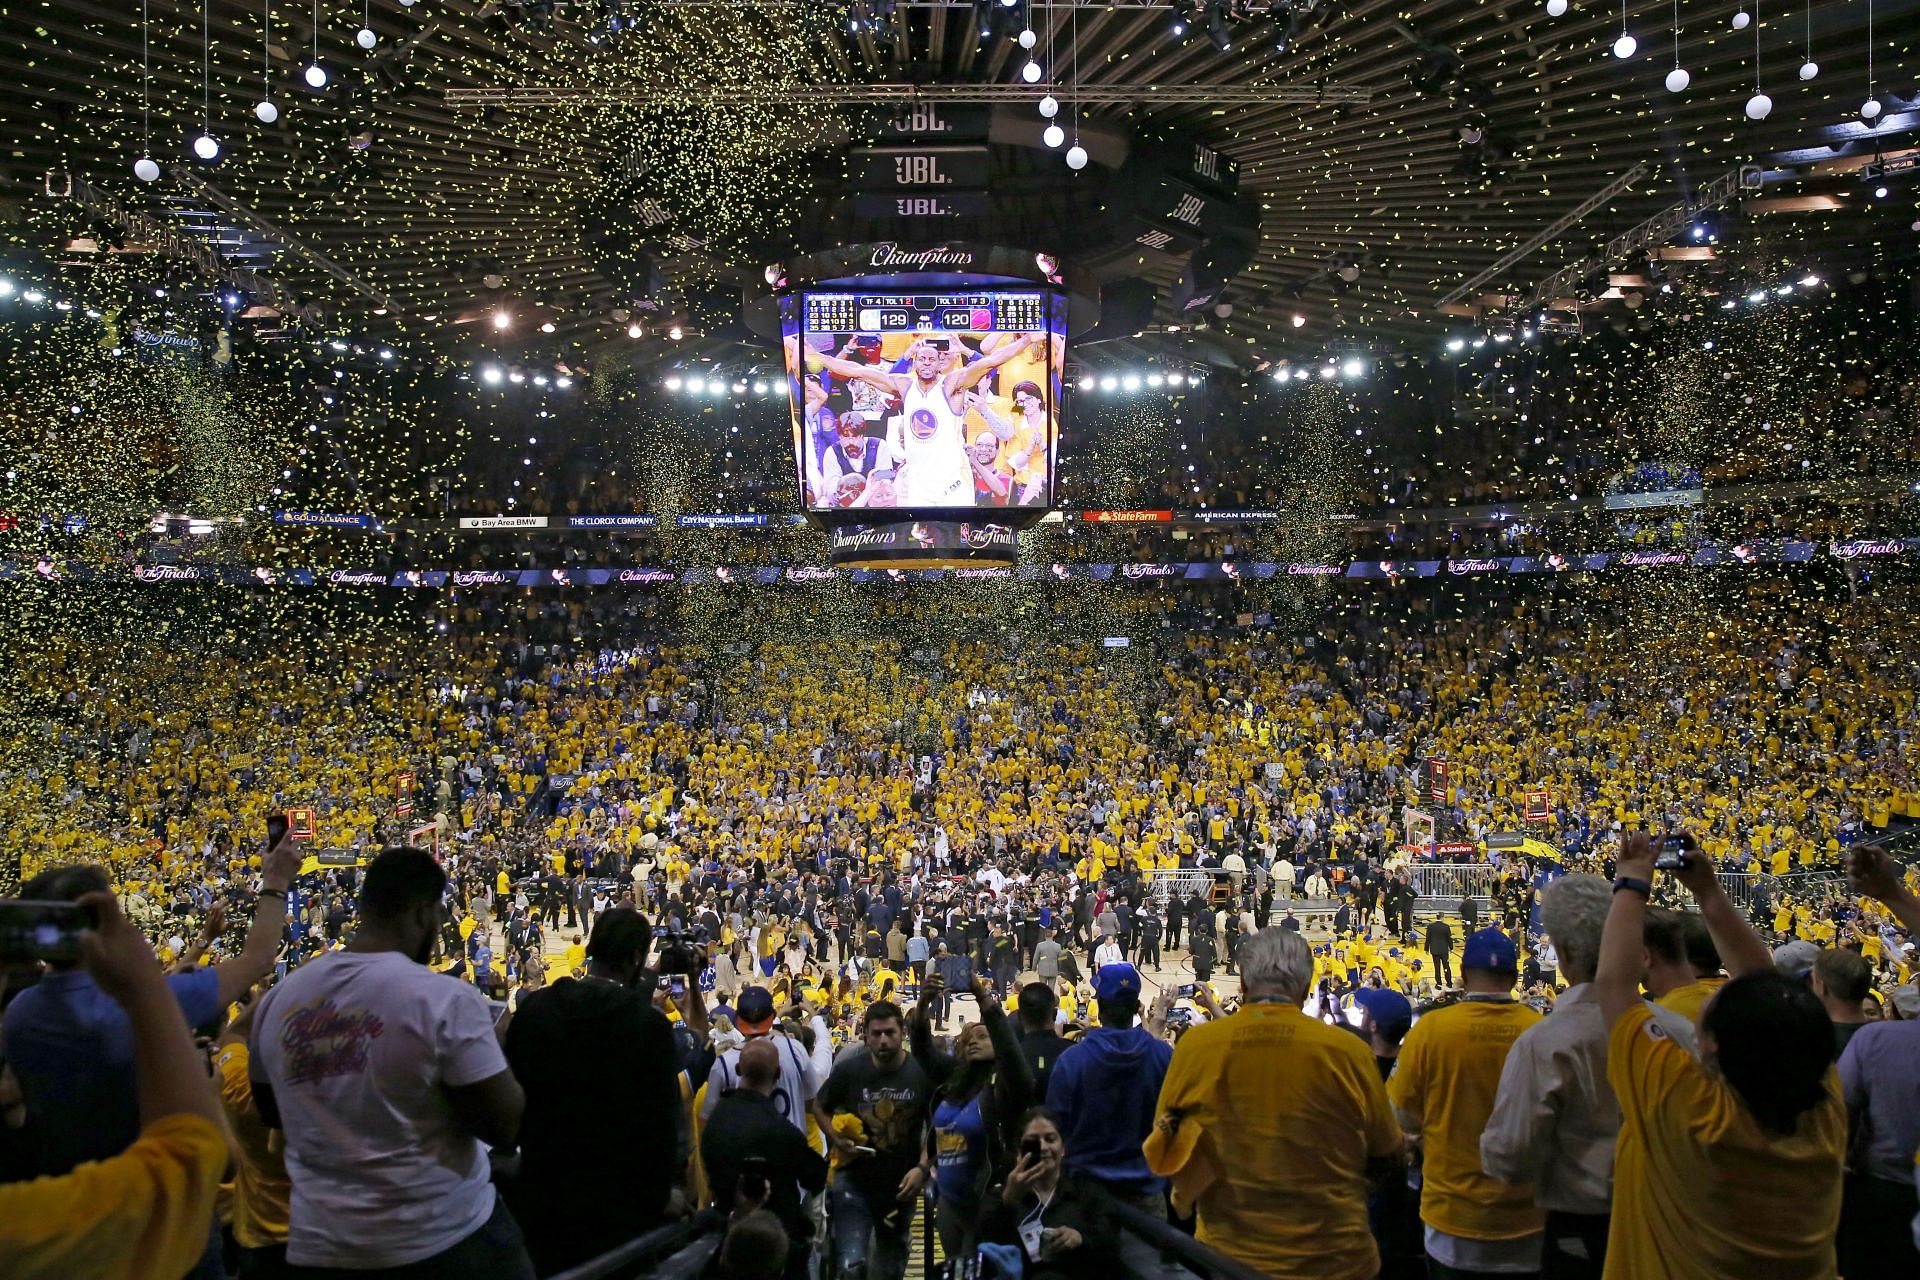 The Golden State Warriors fanbase is becoming one of the most antagonistic in the NBA.